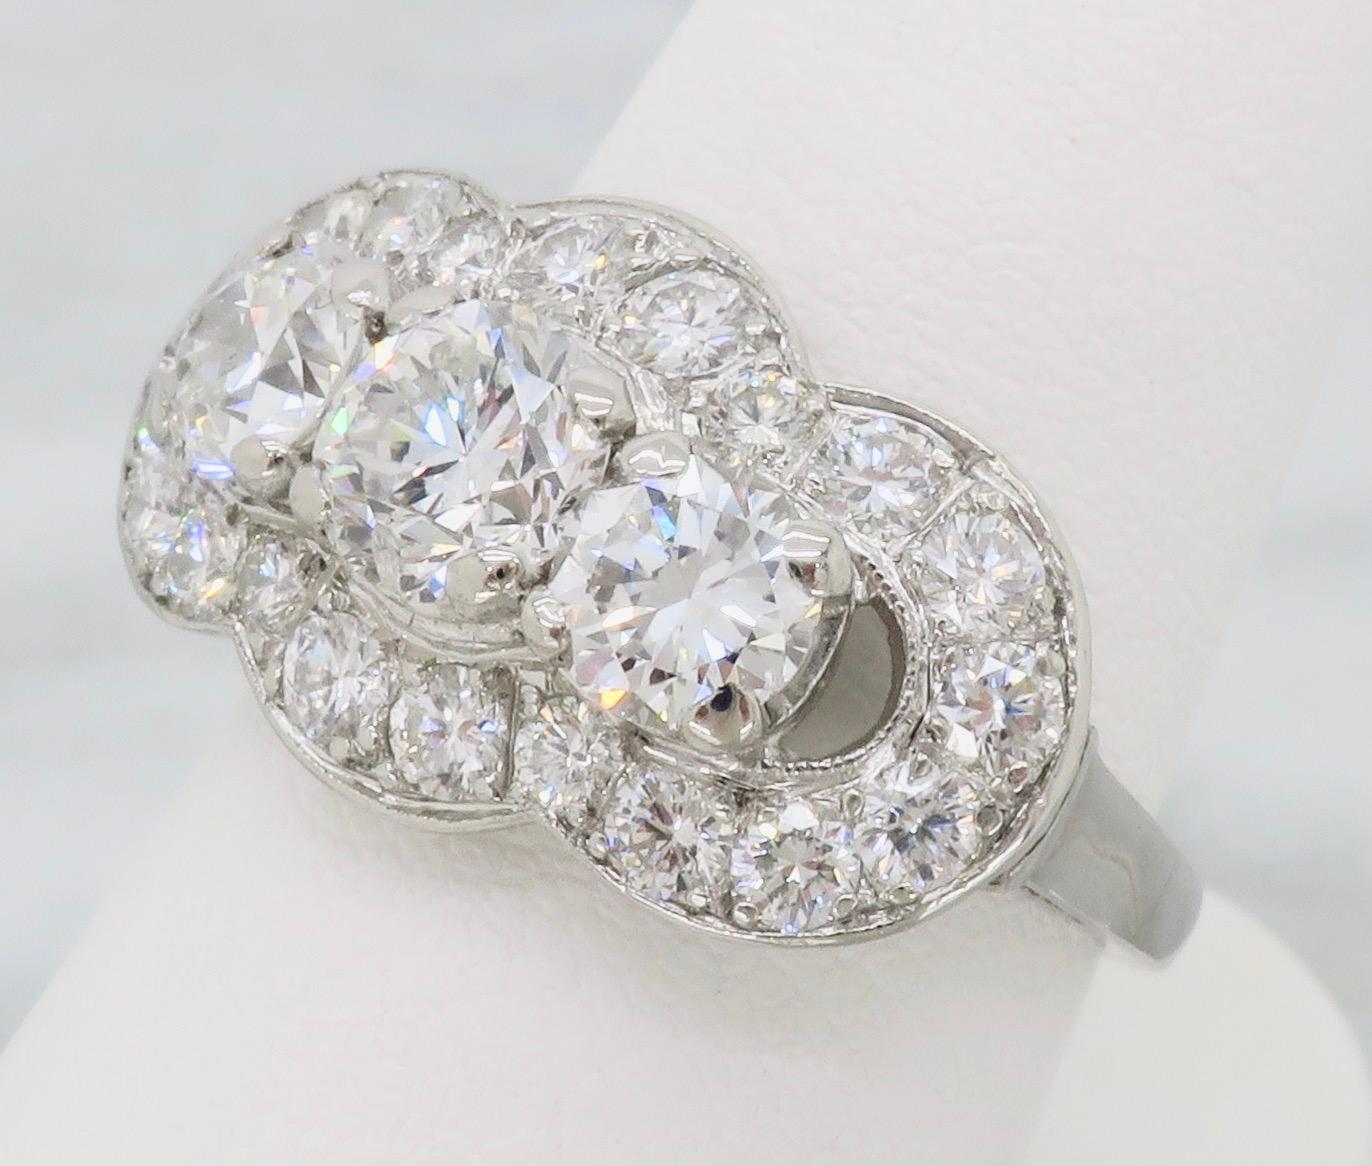 Incredible vintage diamond ring made in Platinum with 2.50ctw of diamonds. 

Diamond Cut: Round Brilliant Cut
Total Diamond Carat Weight: Approximately 2.50CTW
Center Diamond: Approximately .68CT
Center Diamond Color: H-I
Center Diamond Clarity: